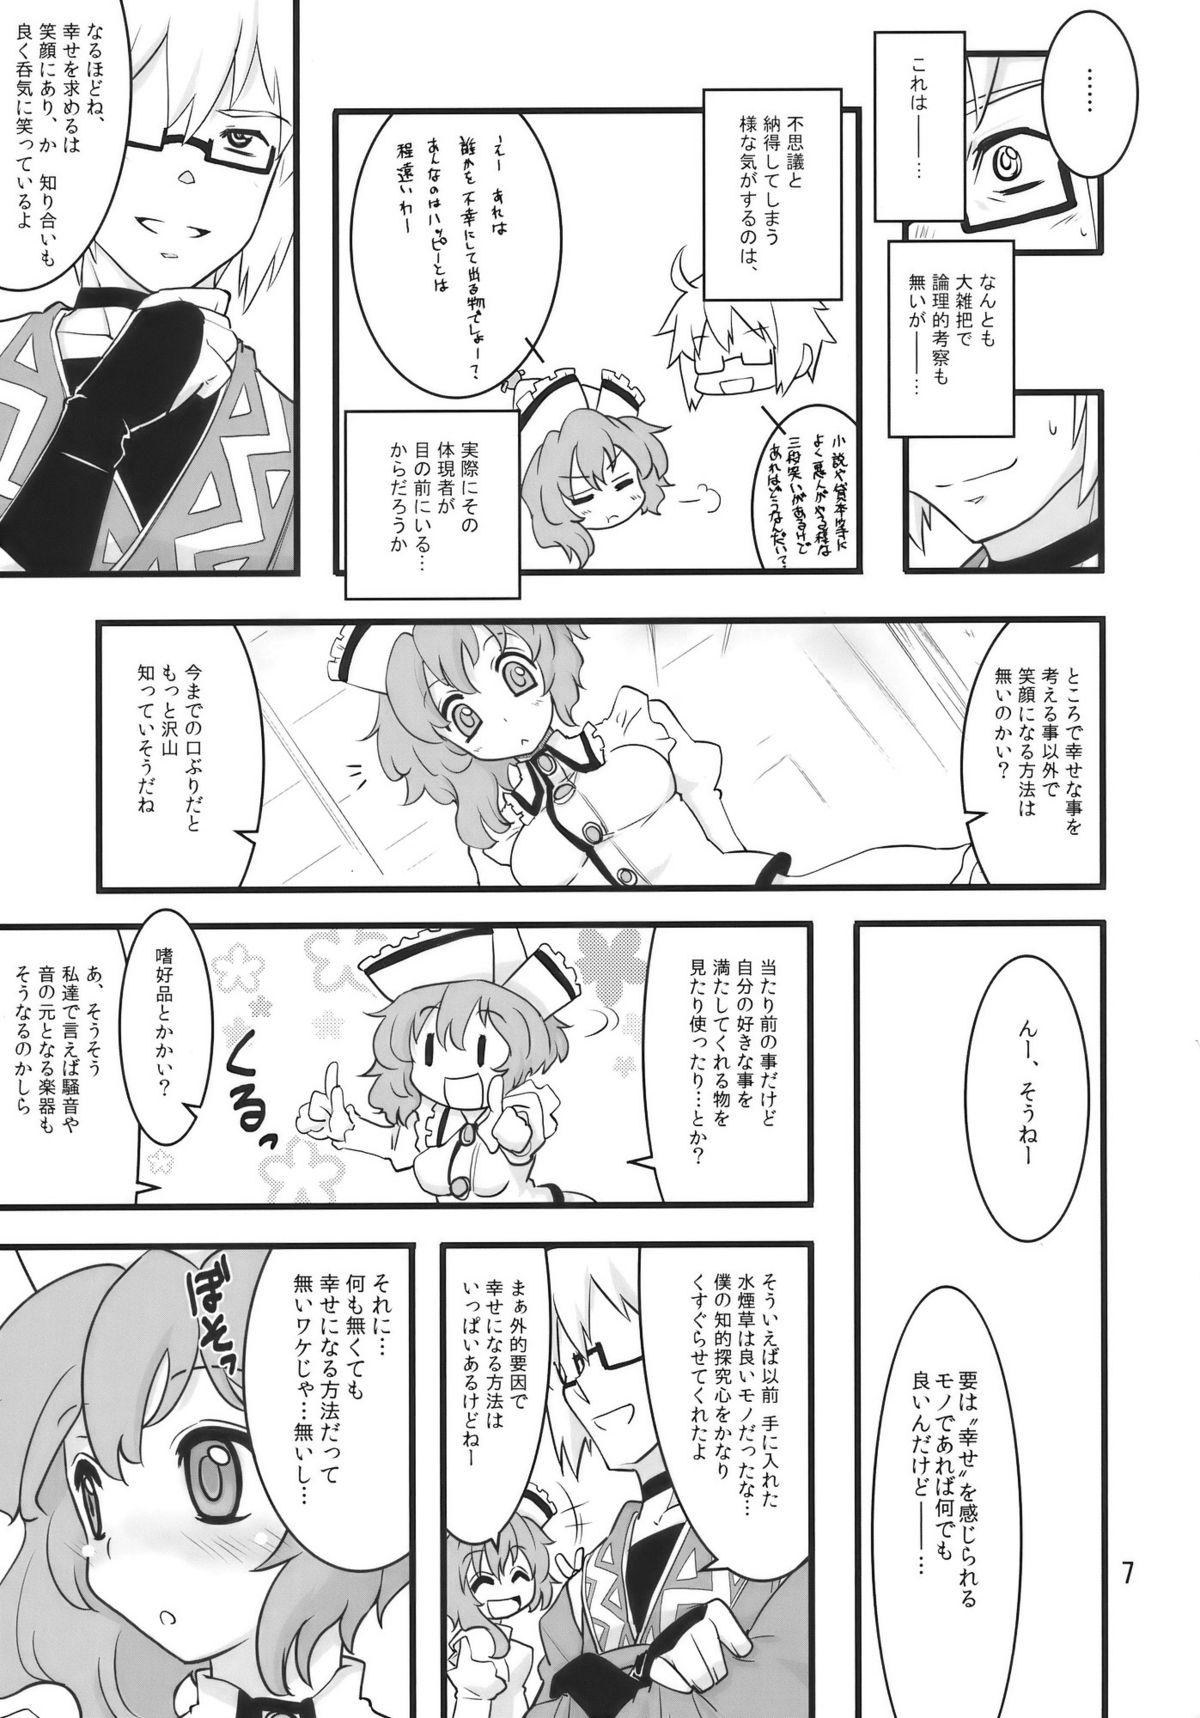 Stripper Happy Trigger - Touhou project Massive - Page 7